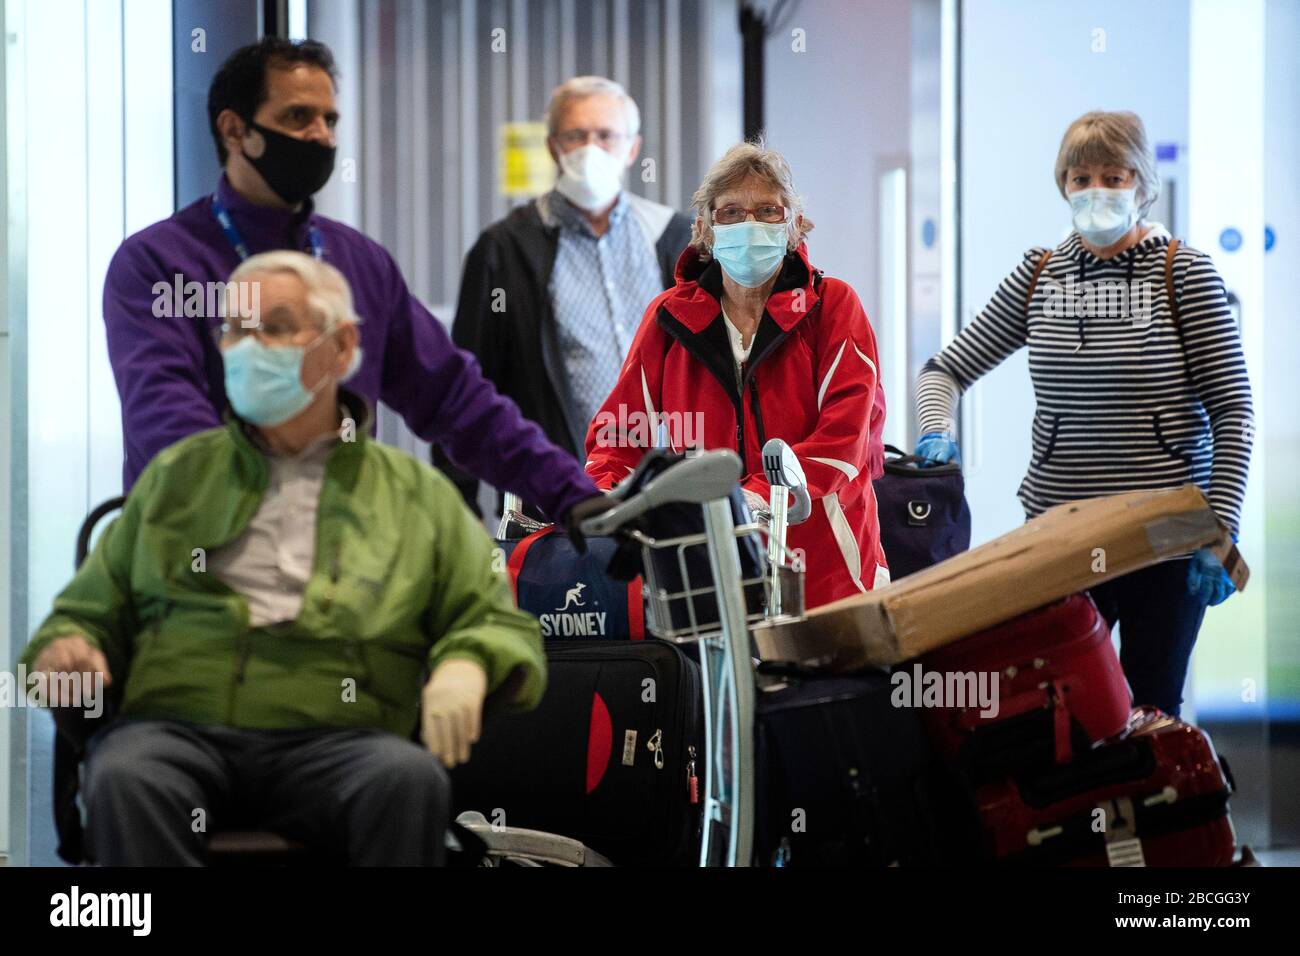 Passengers from the Holland America Line ship Zaandam walk through arrivals in Terminal 2 at Heathrow Airport in London, after flying back on a repatriation flight from Florida. Stock Photo